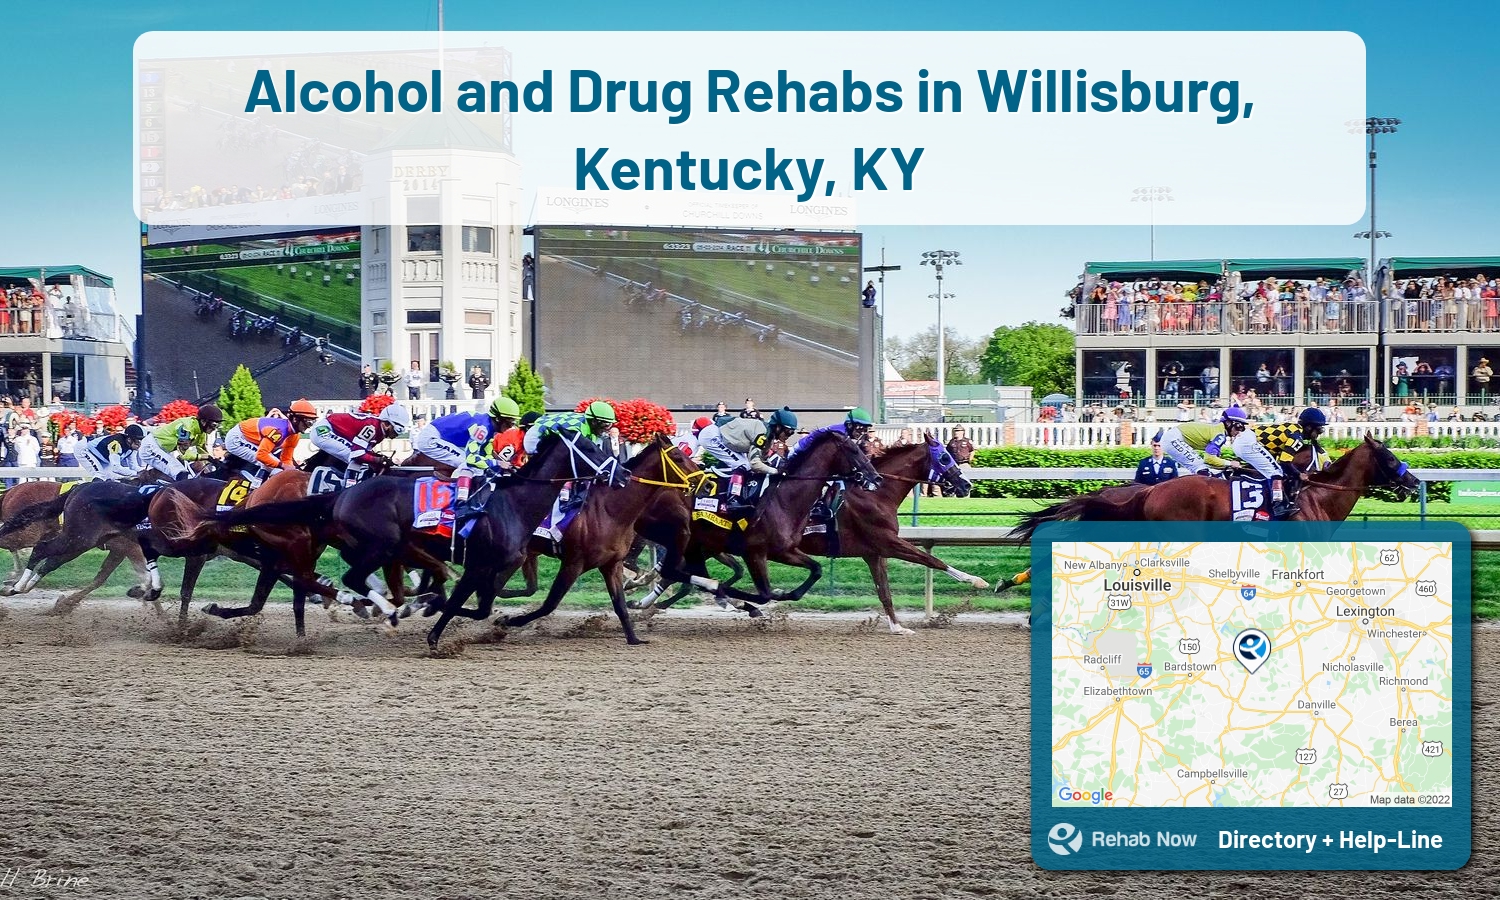 Willisburg, KY Treatment Centers. Find drug rehab in Willisburg, Kentucky, or detox and treatment programs. Get the right help now!